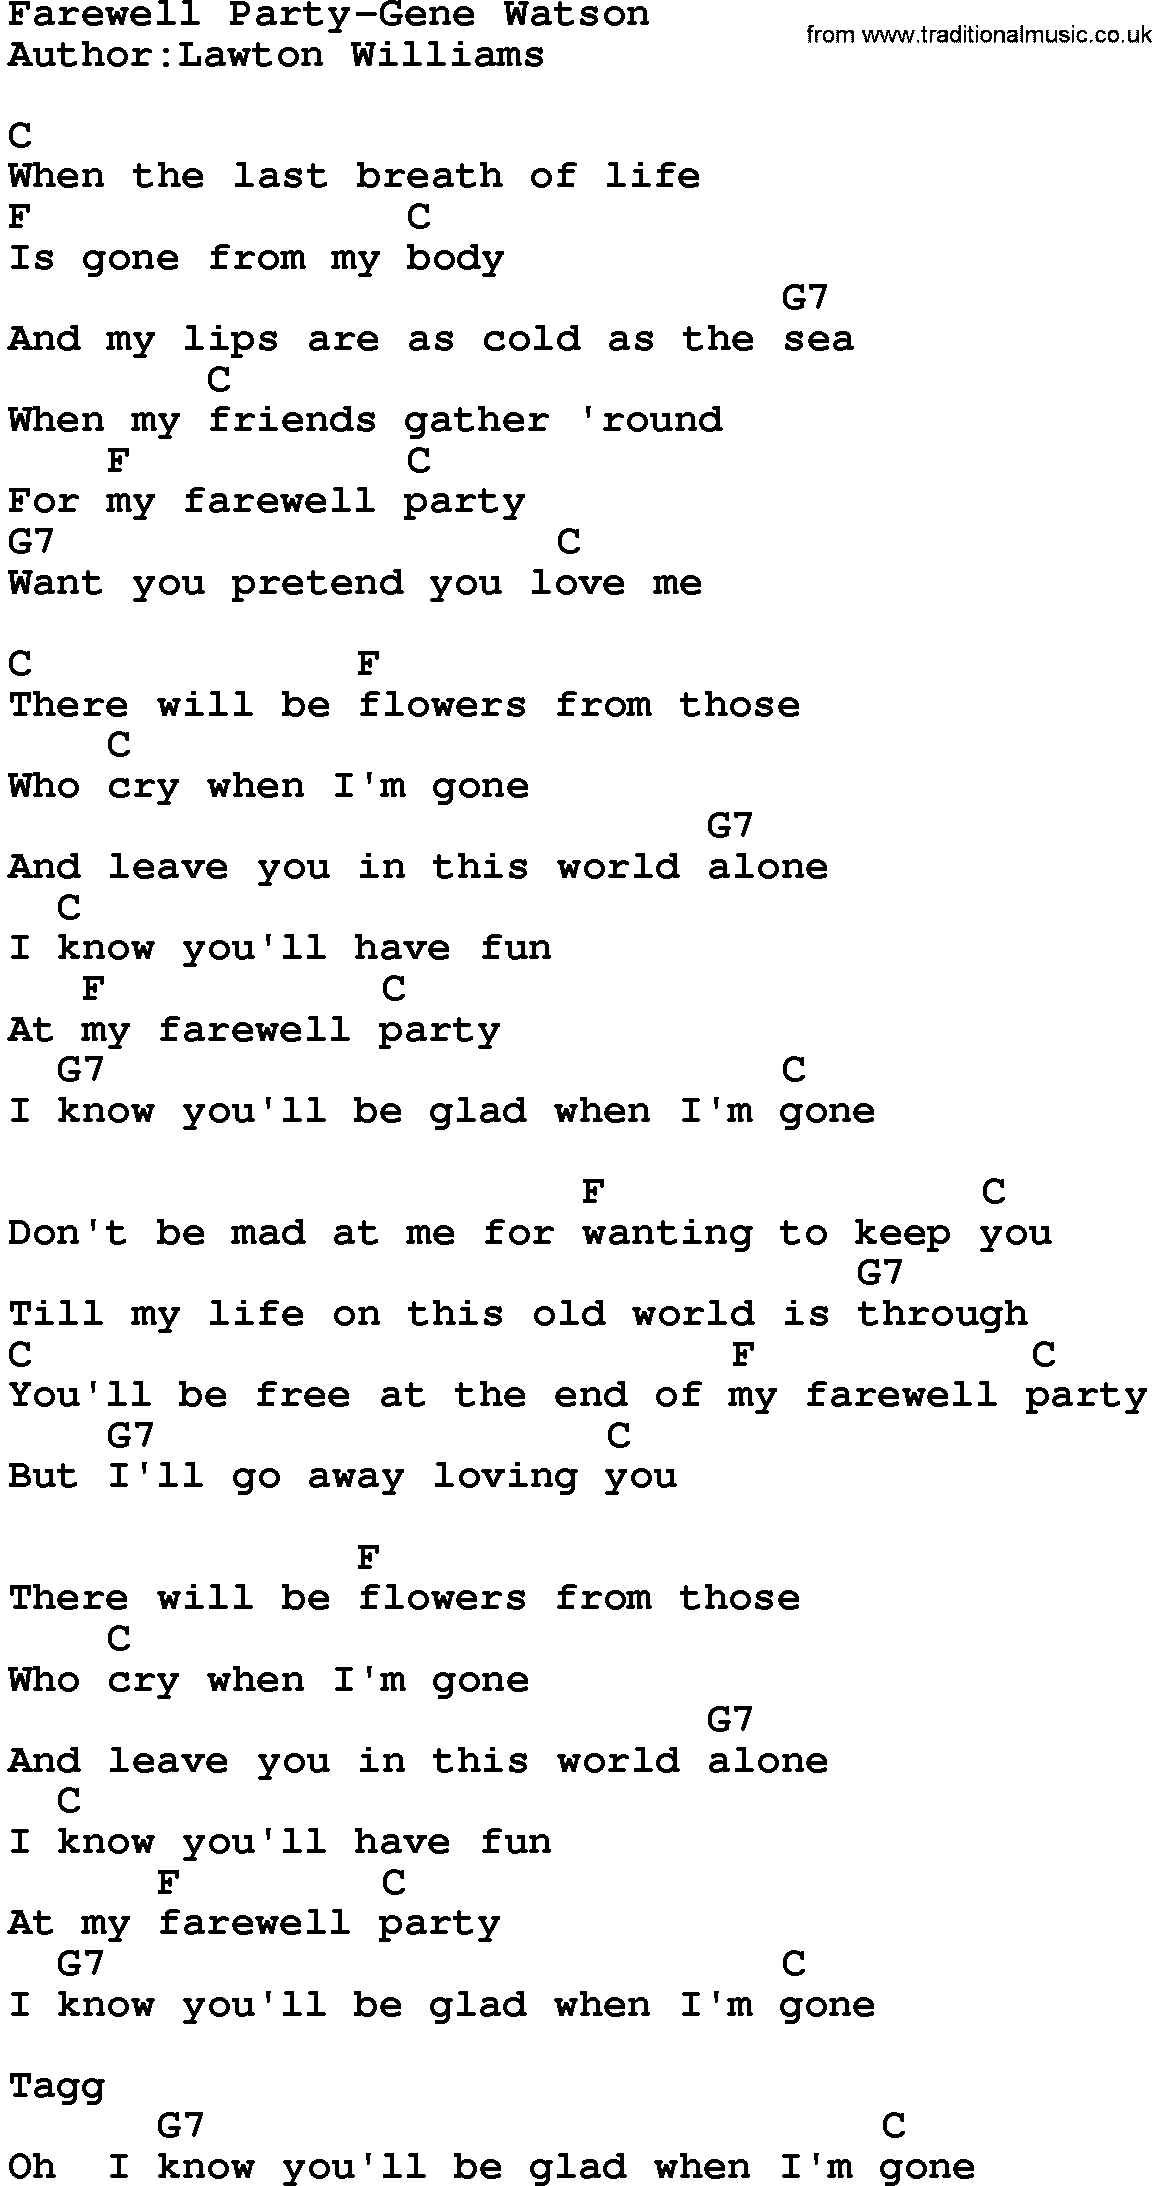 Country music song: Farewell Party-Gene Watson lyrics and chords